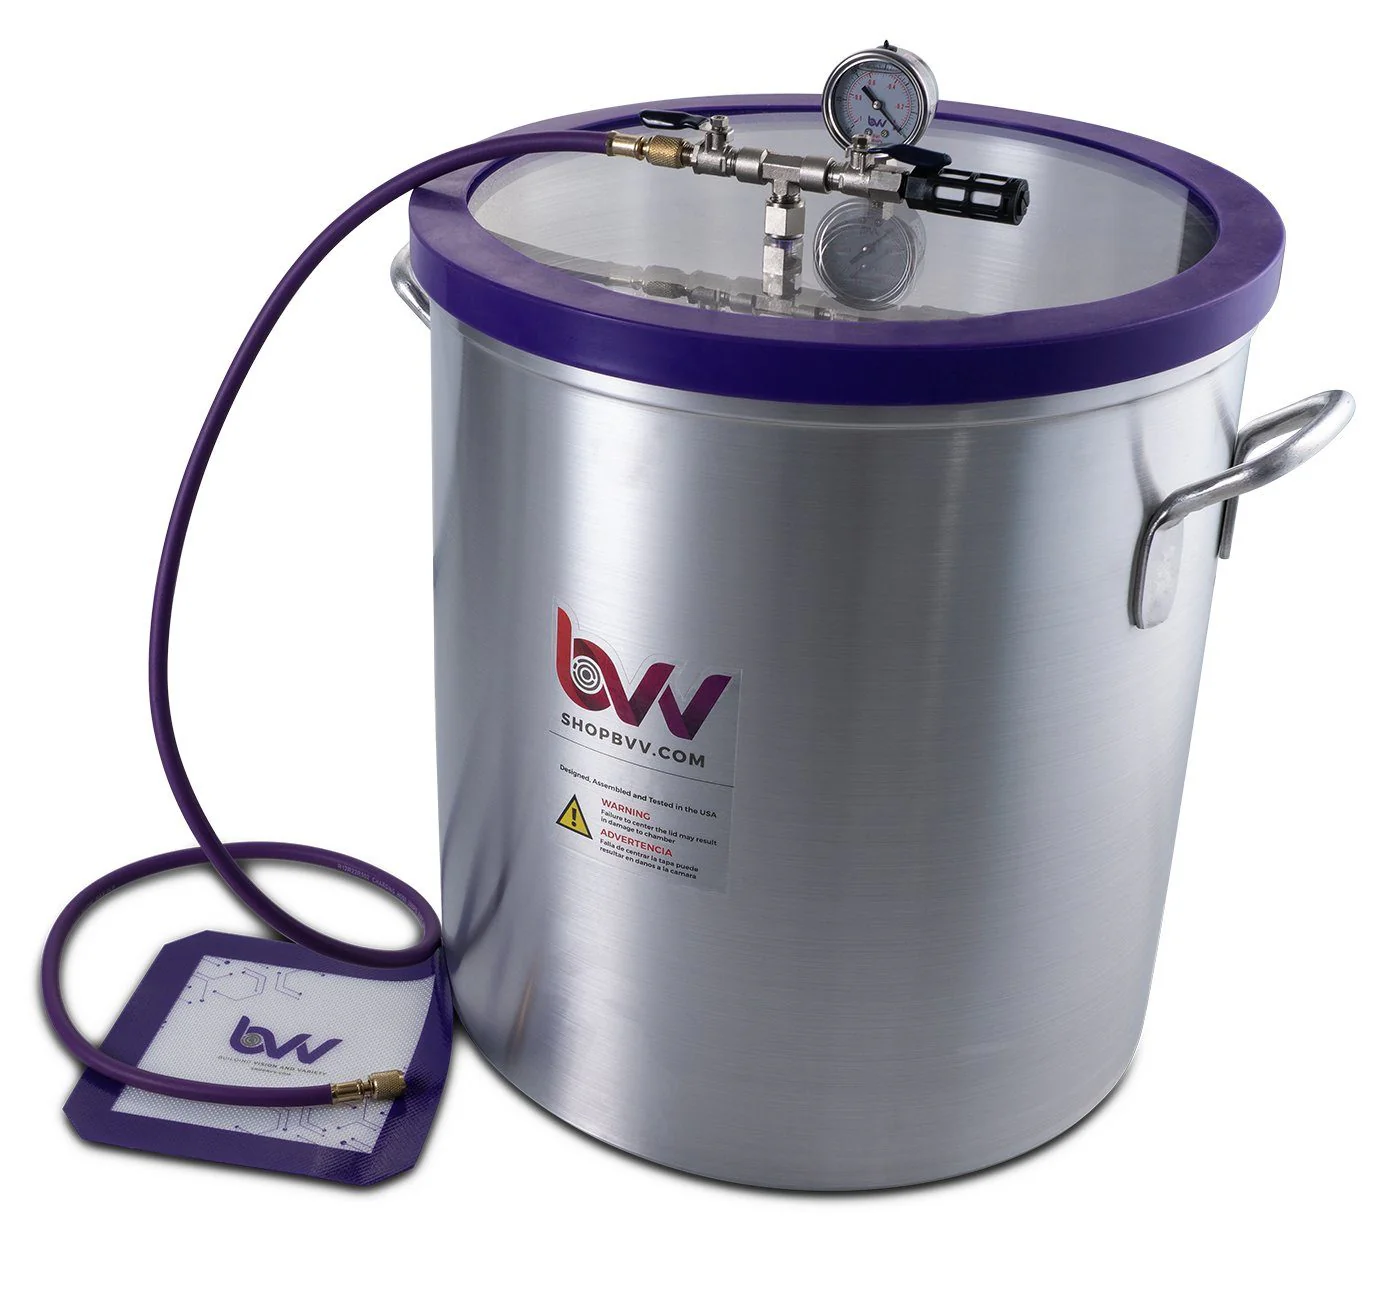 What are the dimensions of the 15 gal. chamber, how much vacuum can it handle, and what is the lid made of?